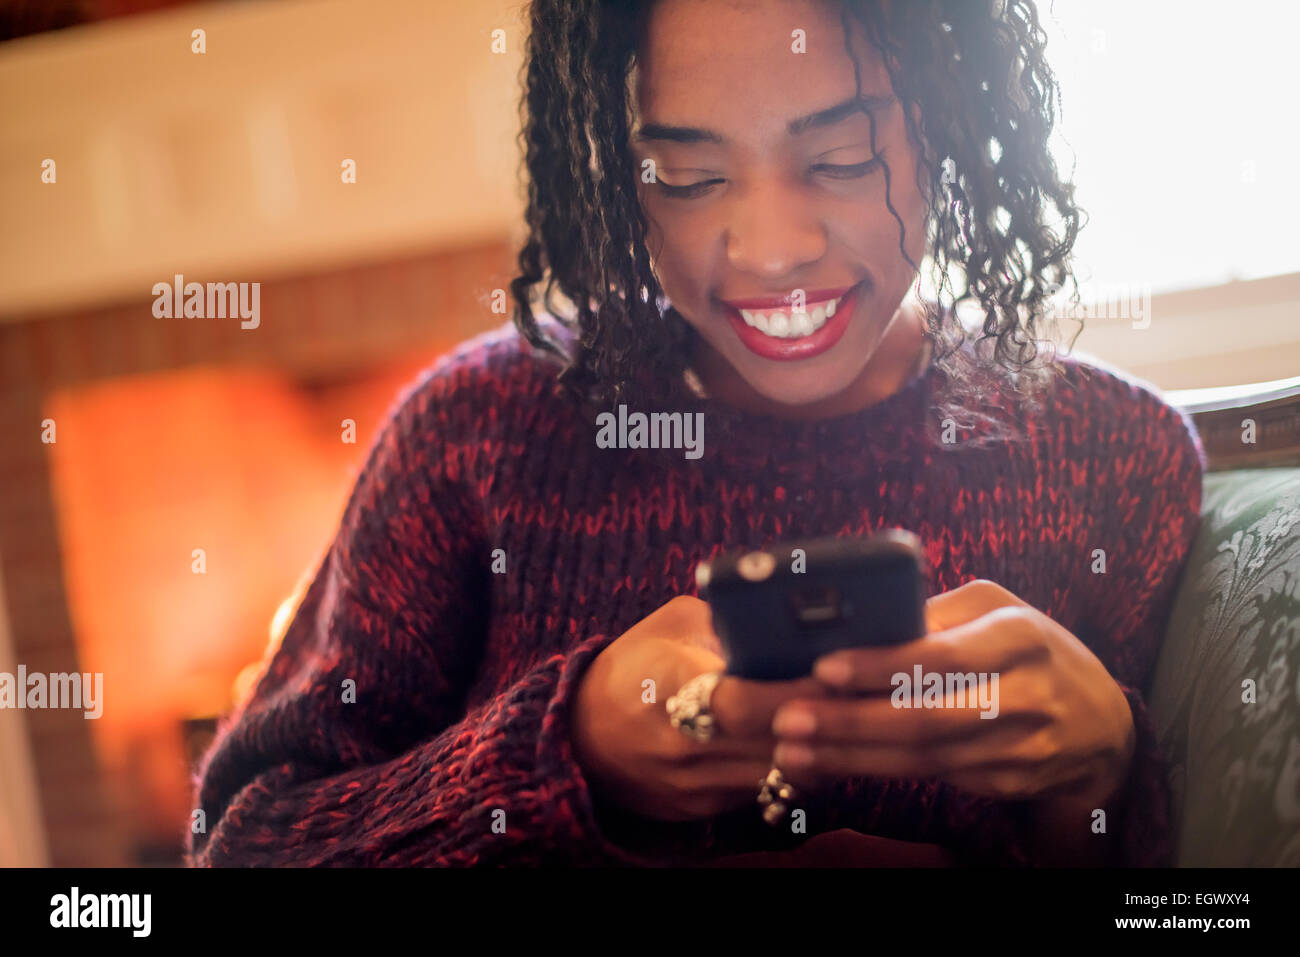 A woman checking her cell phone and smiling. Stock Photo